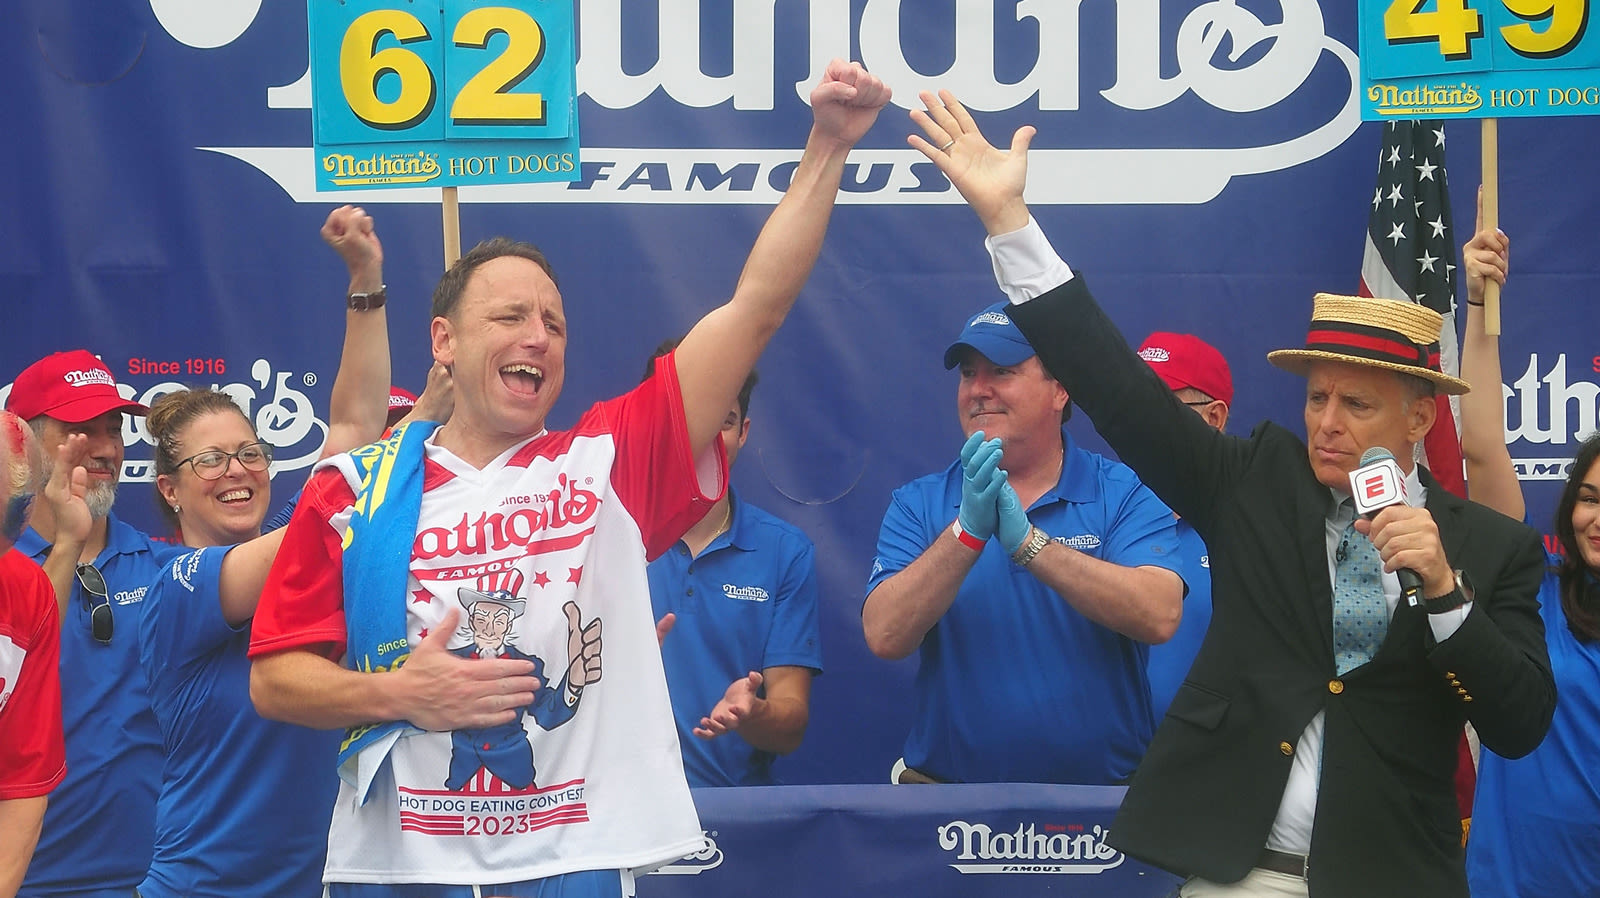 Joey Chestnut Is Still Competing On July 4, Despite His Nathan's Ban